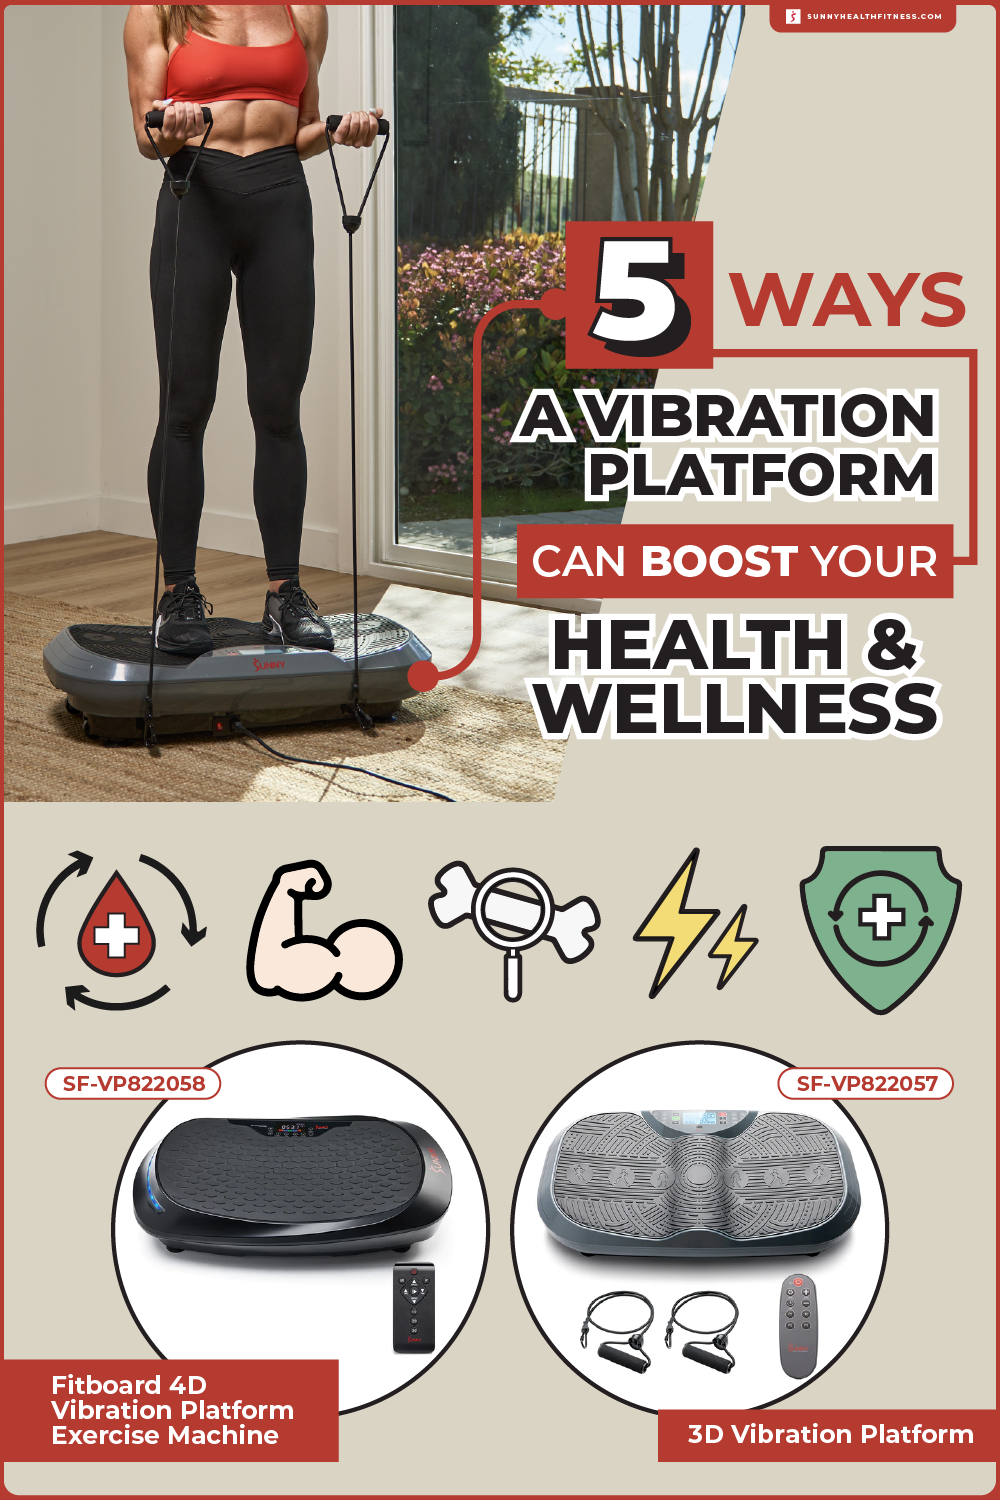 5 Ways a Vibration Platform Can Boost Your Health and Wellness